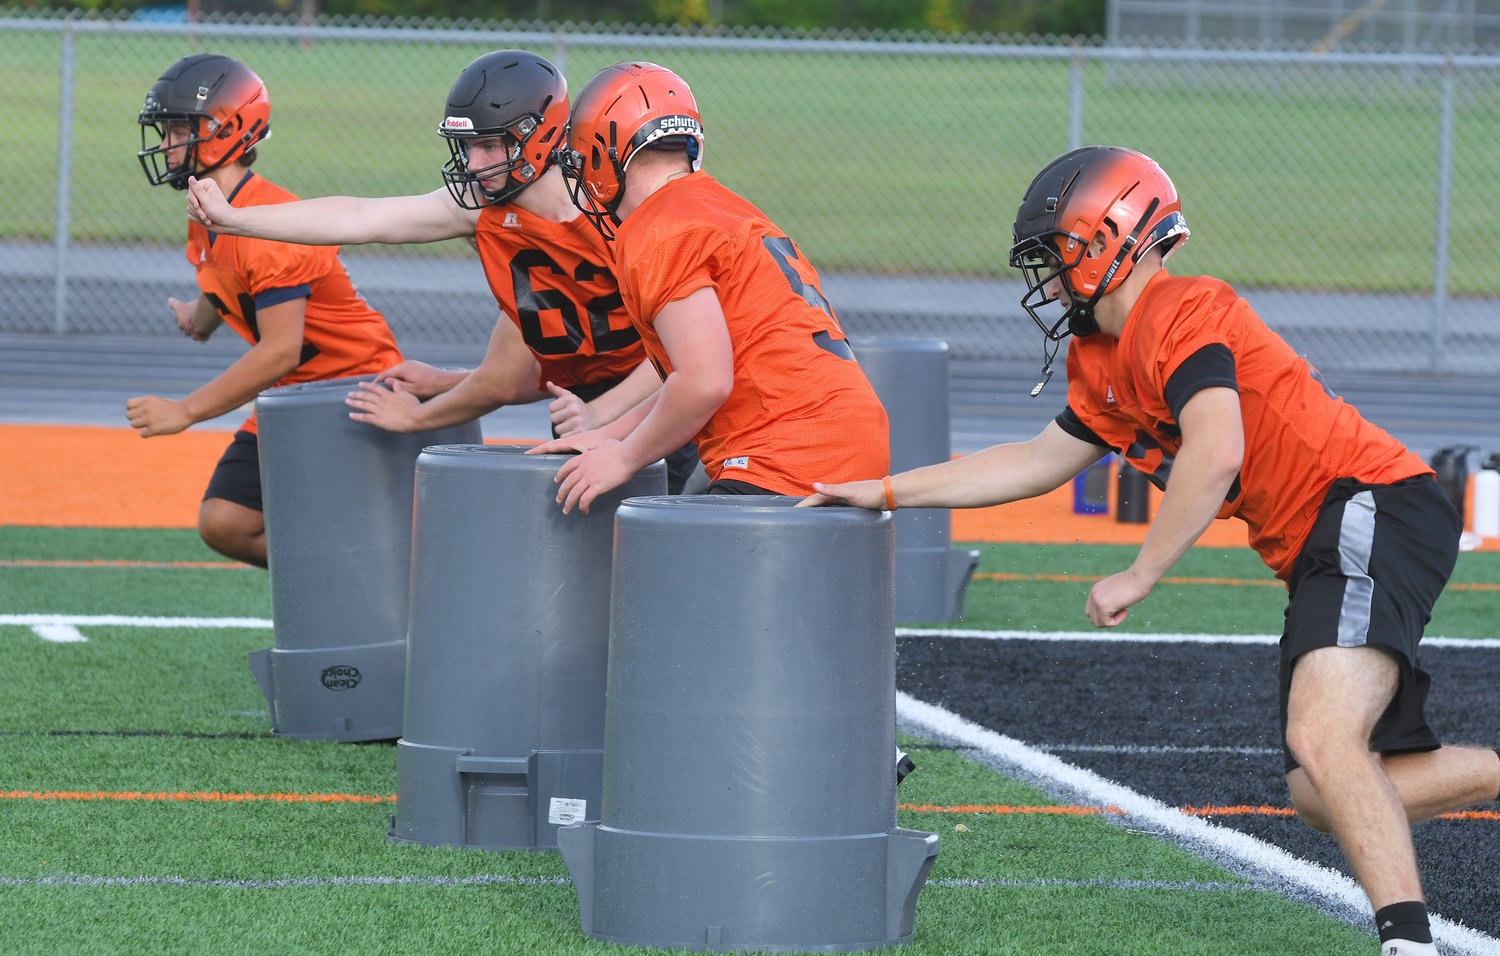 Rome Free Academy linemen practice their assignments during practice on Monday evening at RFA Stadium. The Black Knights will open the season at 6:30 p.m. on Friday, Sept. 2 at home against New Hartford.